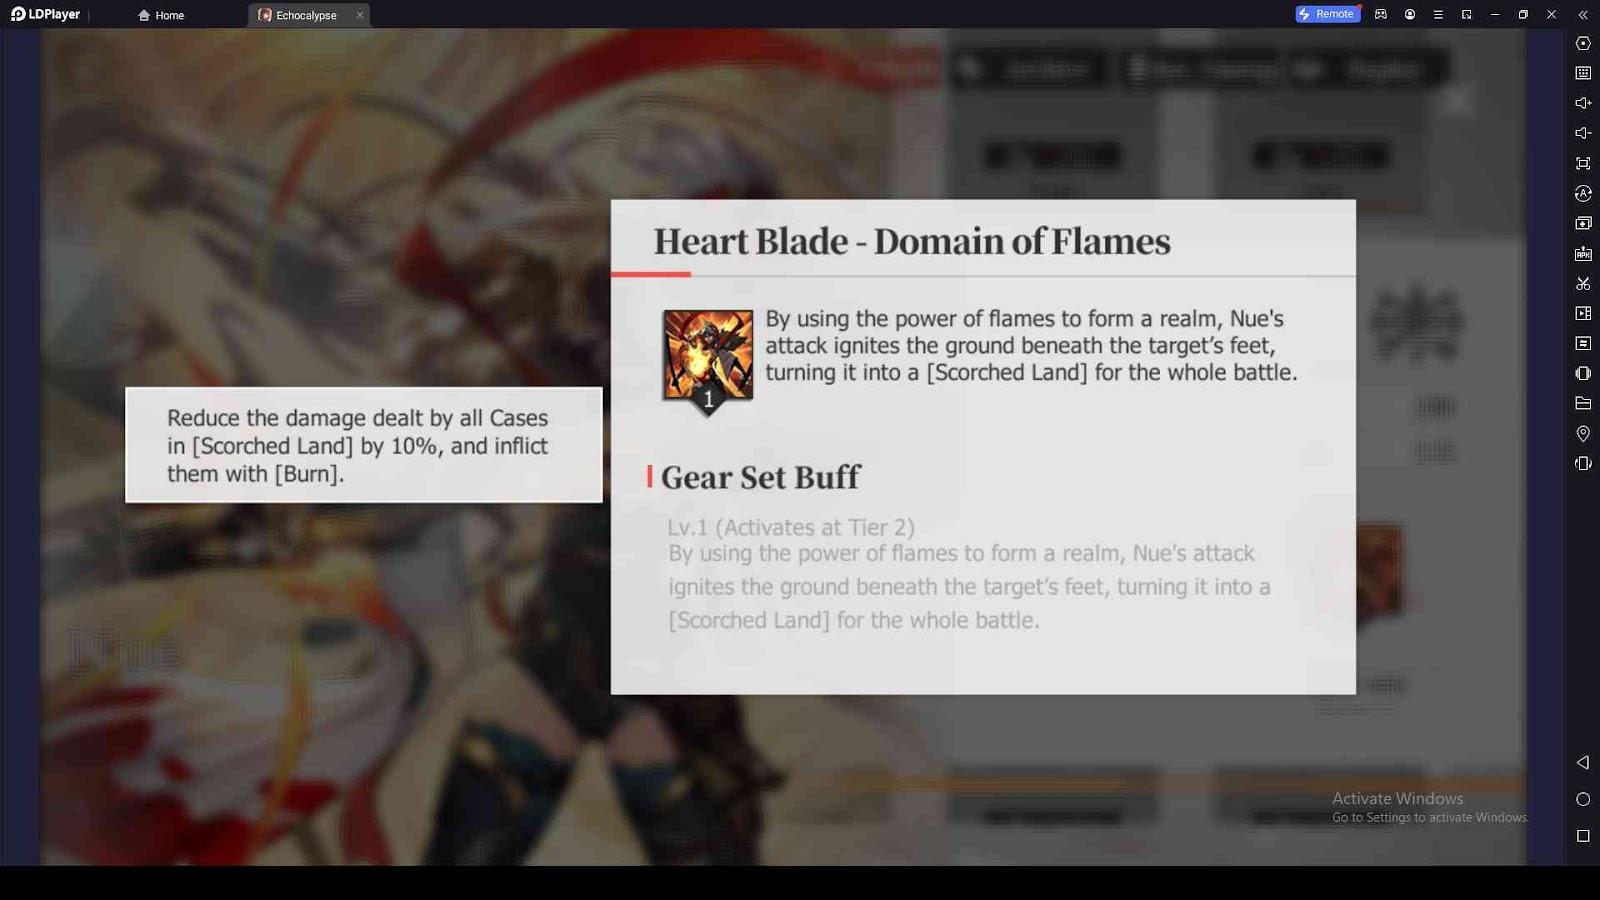 Heart Blade - Domain of Flames